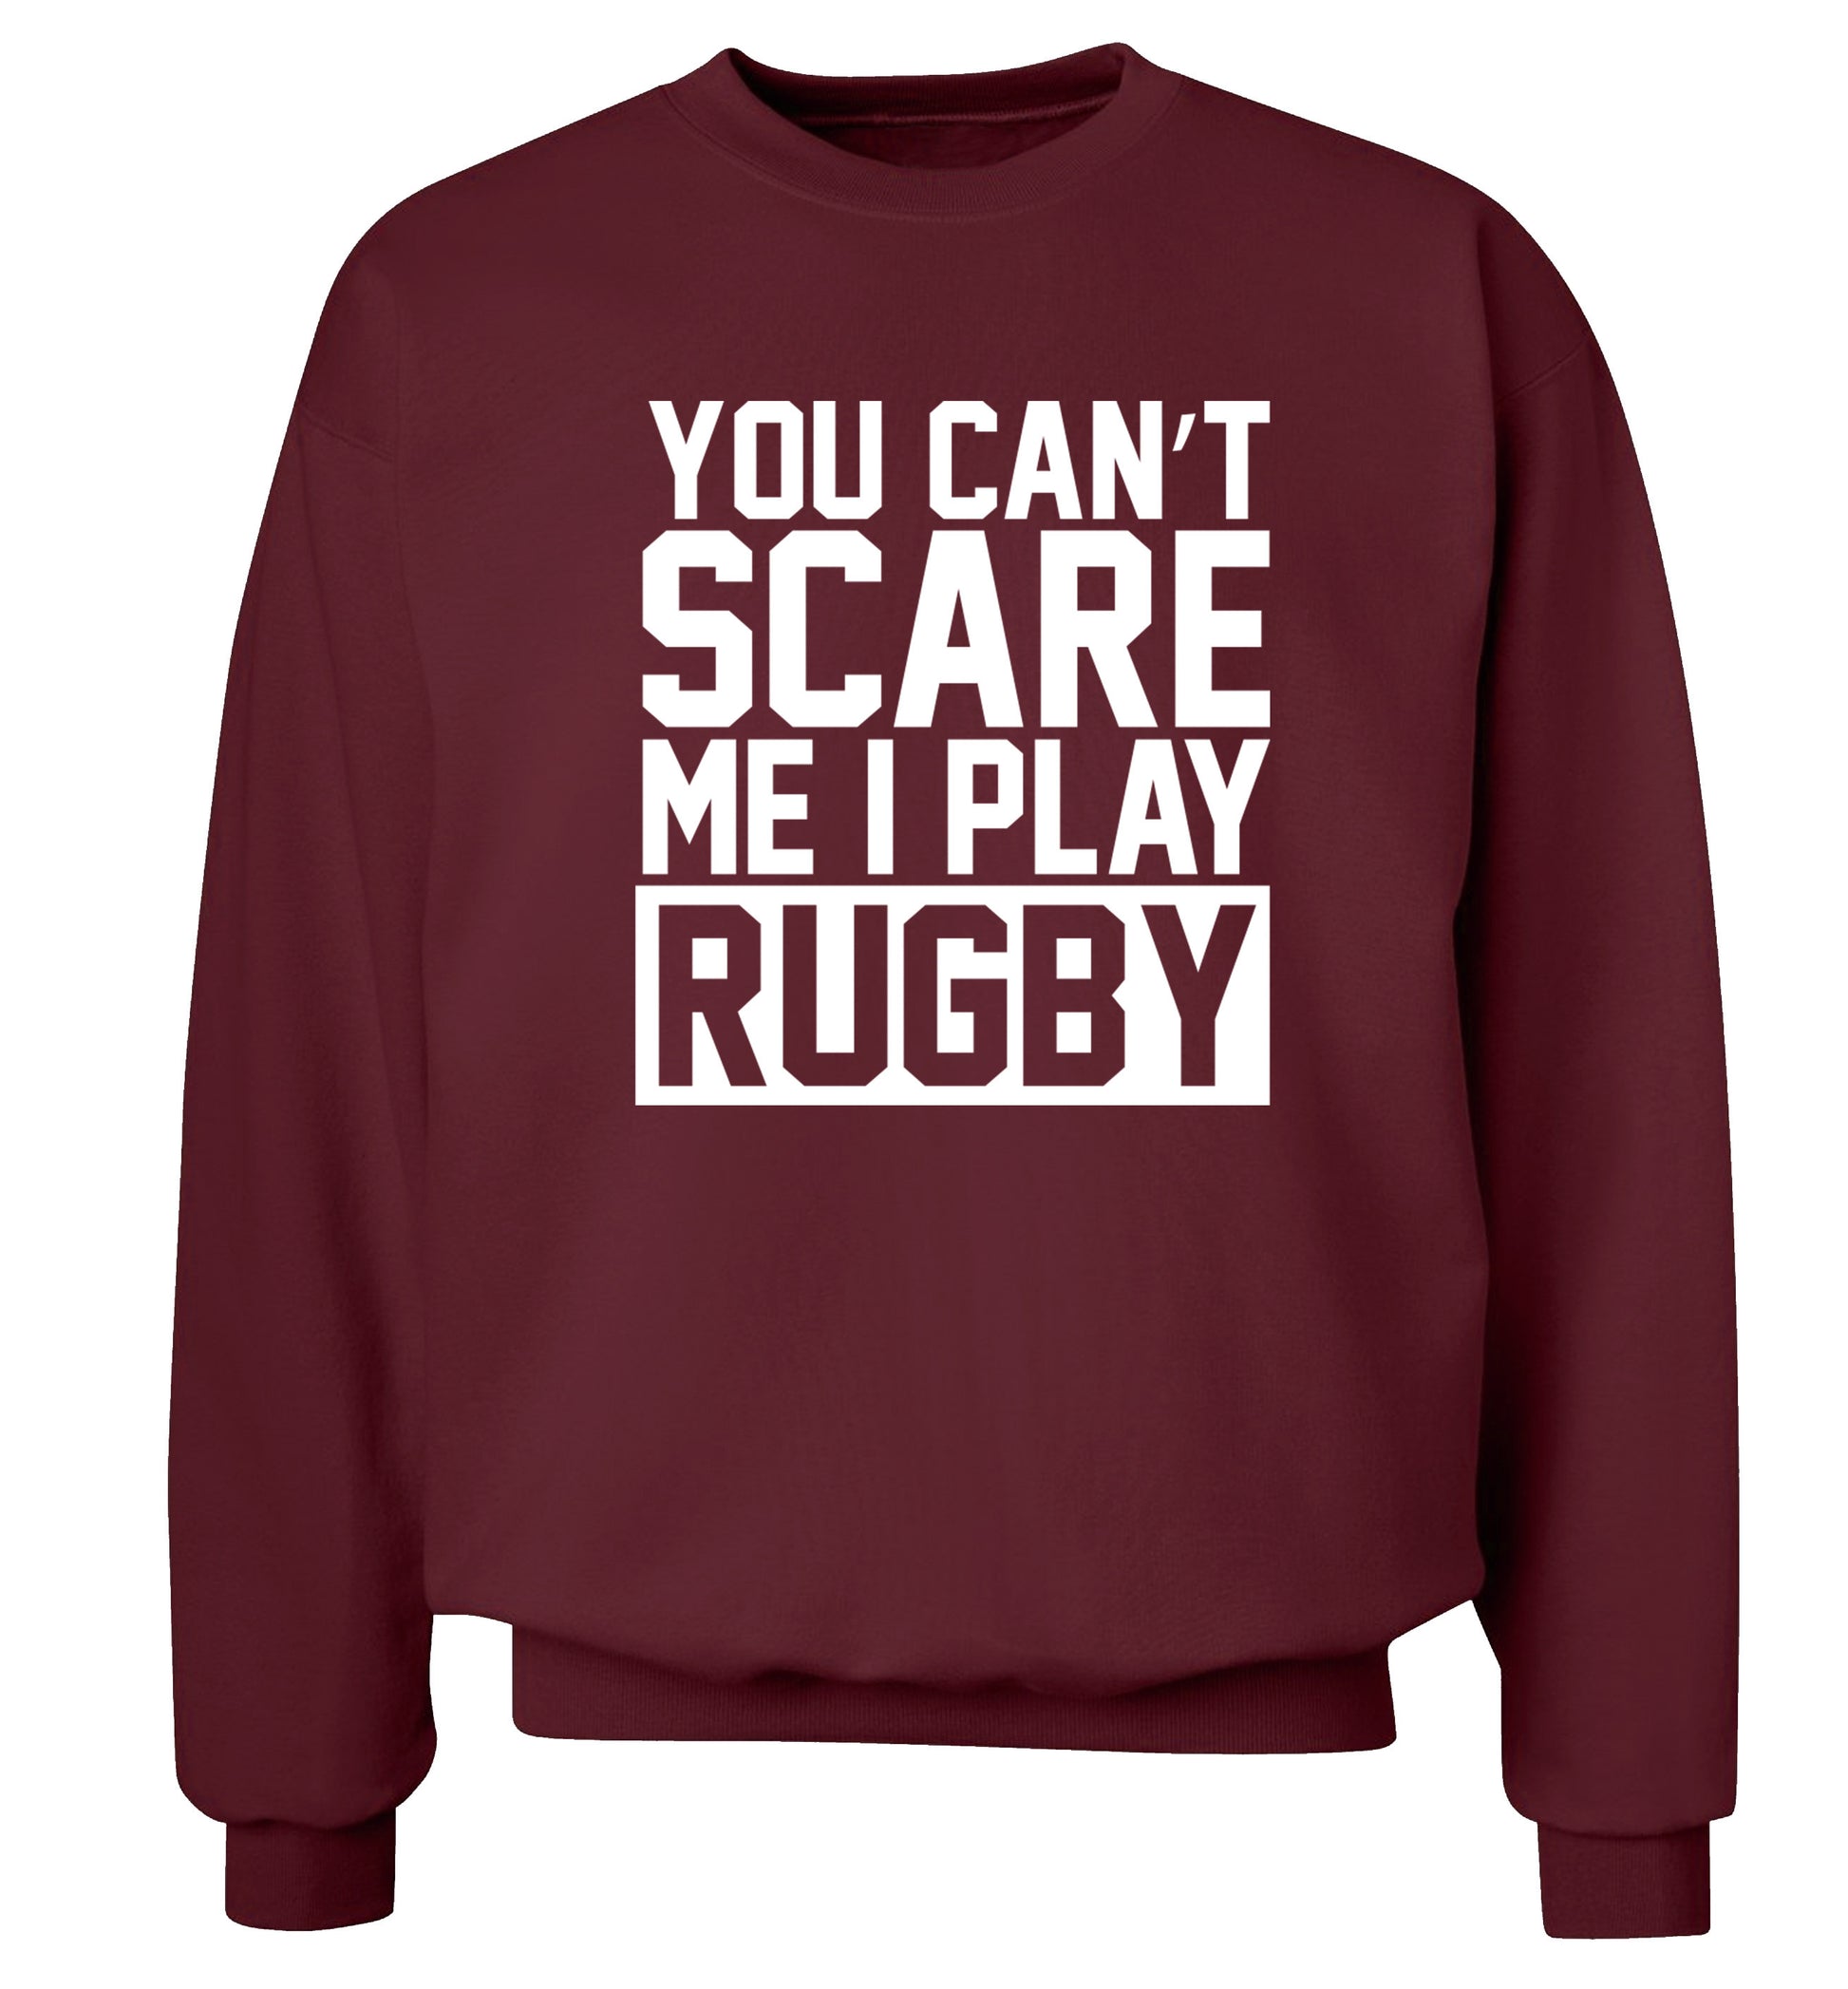 You can't scare me I play rugby Adult's unisex maroon Sweater 2XL